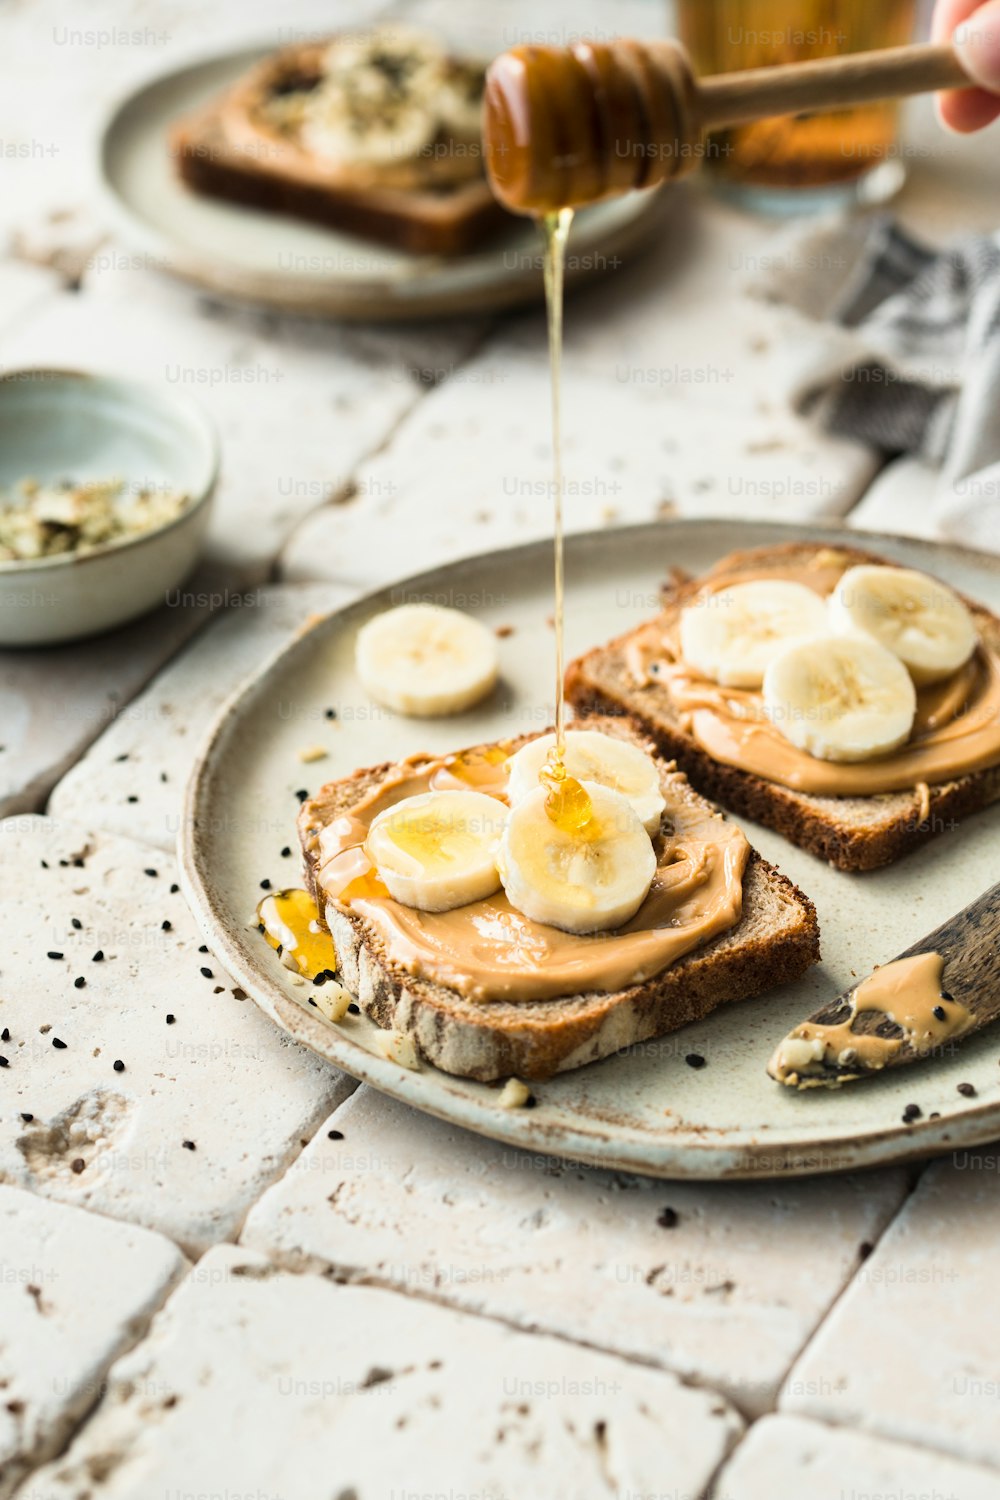 a plate of toast with peanut butter and banana slices